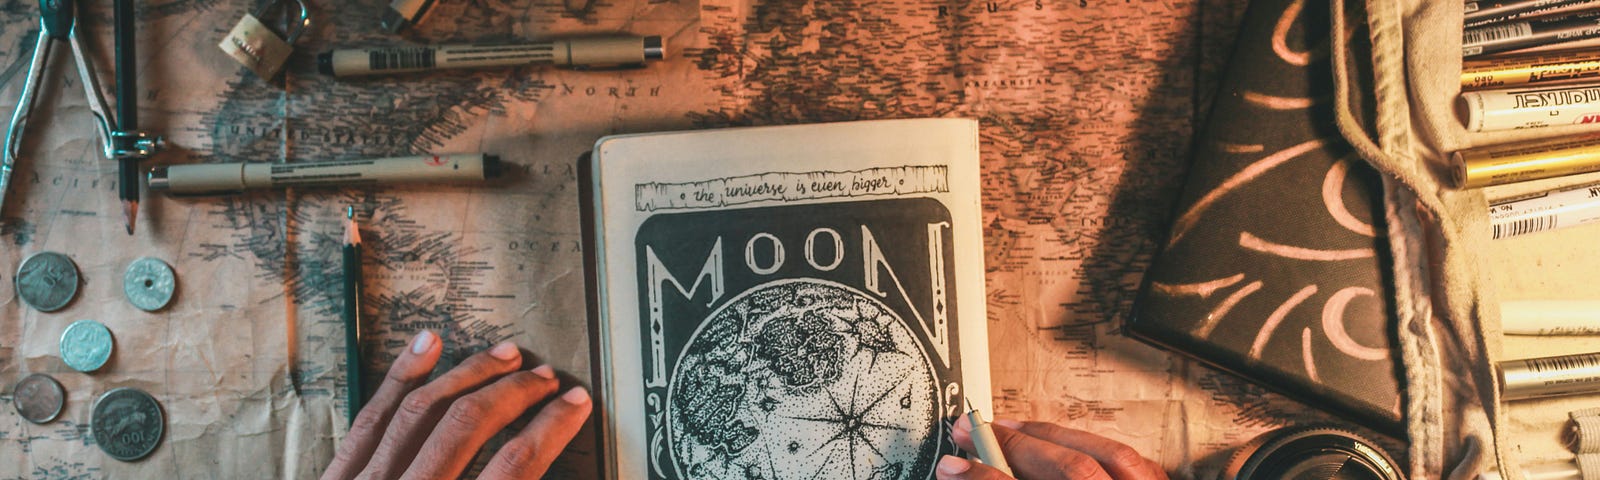 A notebook with a sketch of the moon on a desk surrounded by pens, maps, and other writing materials